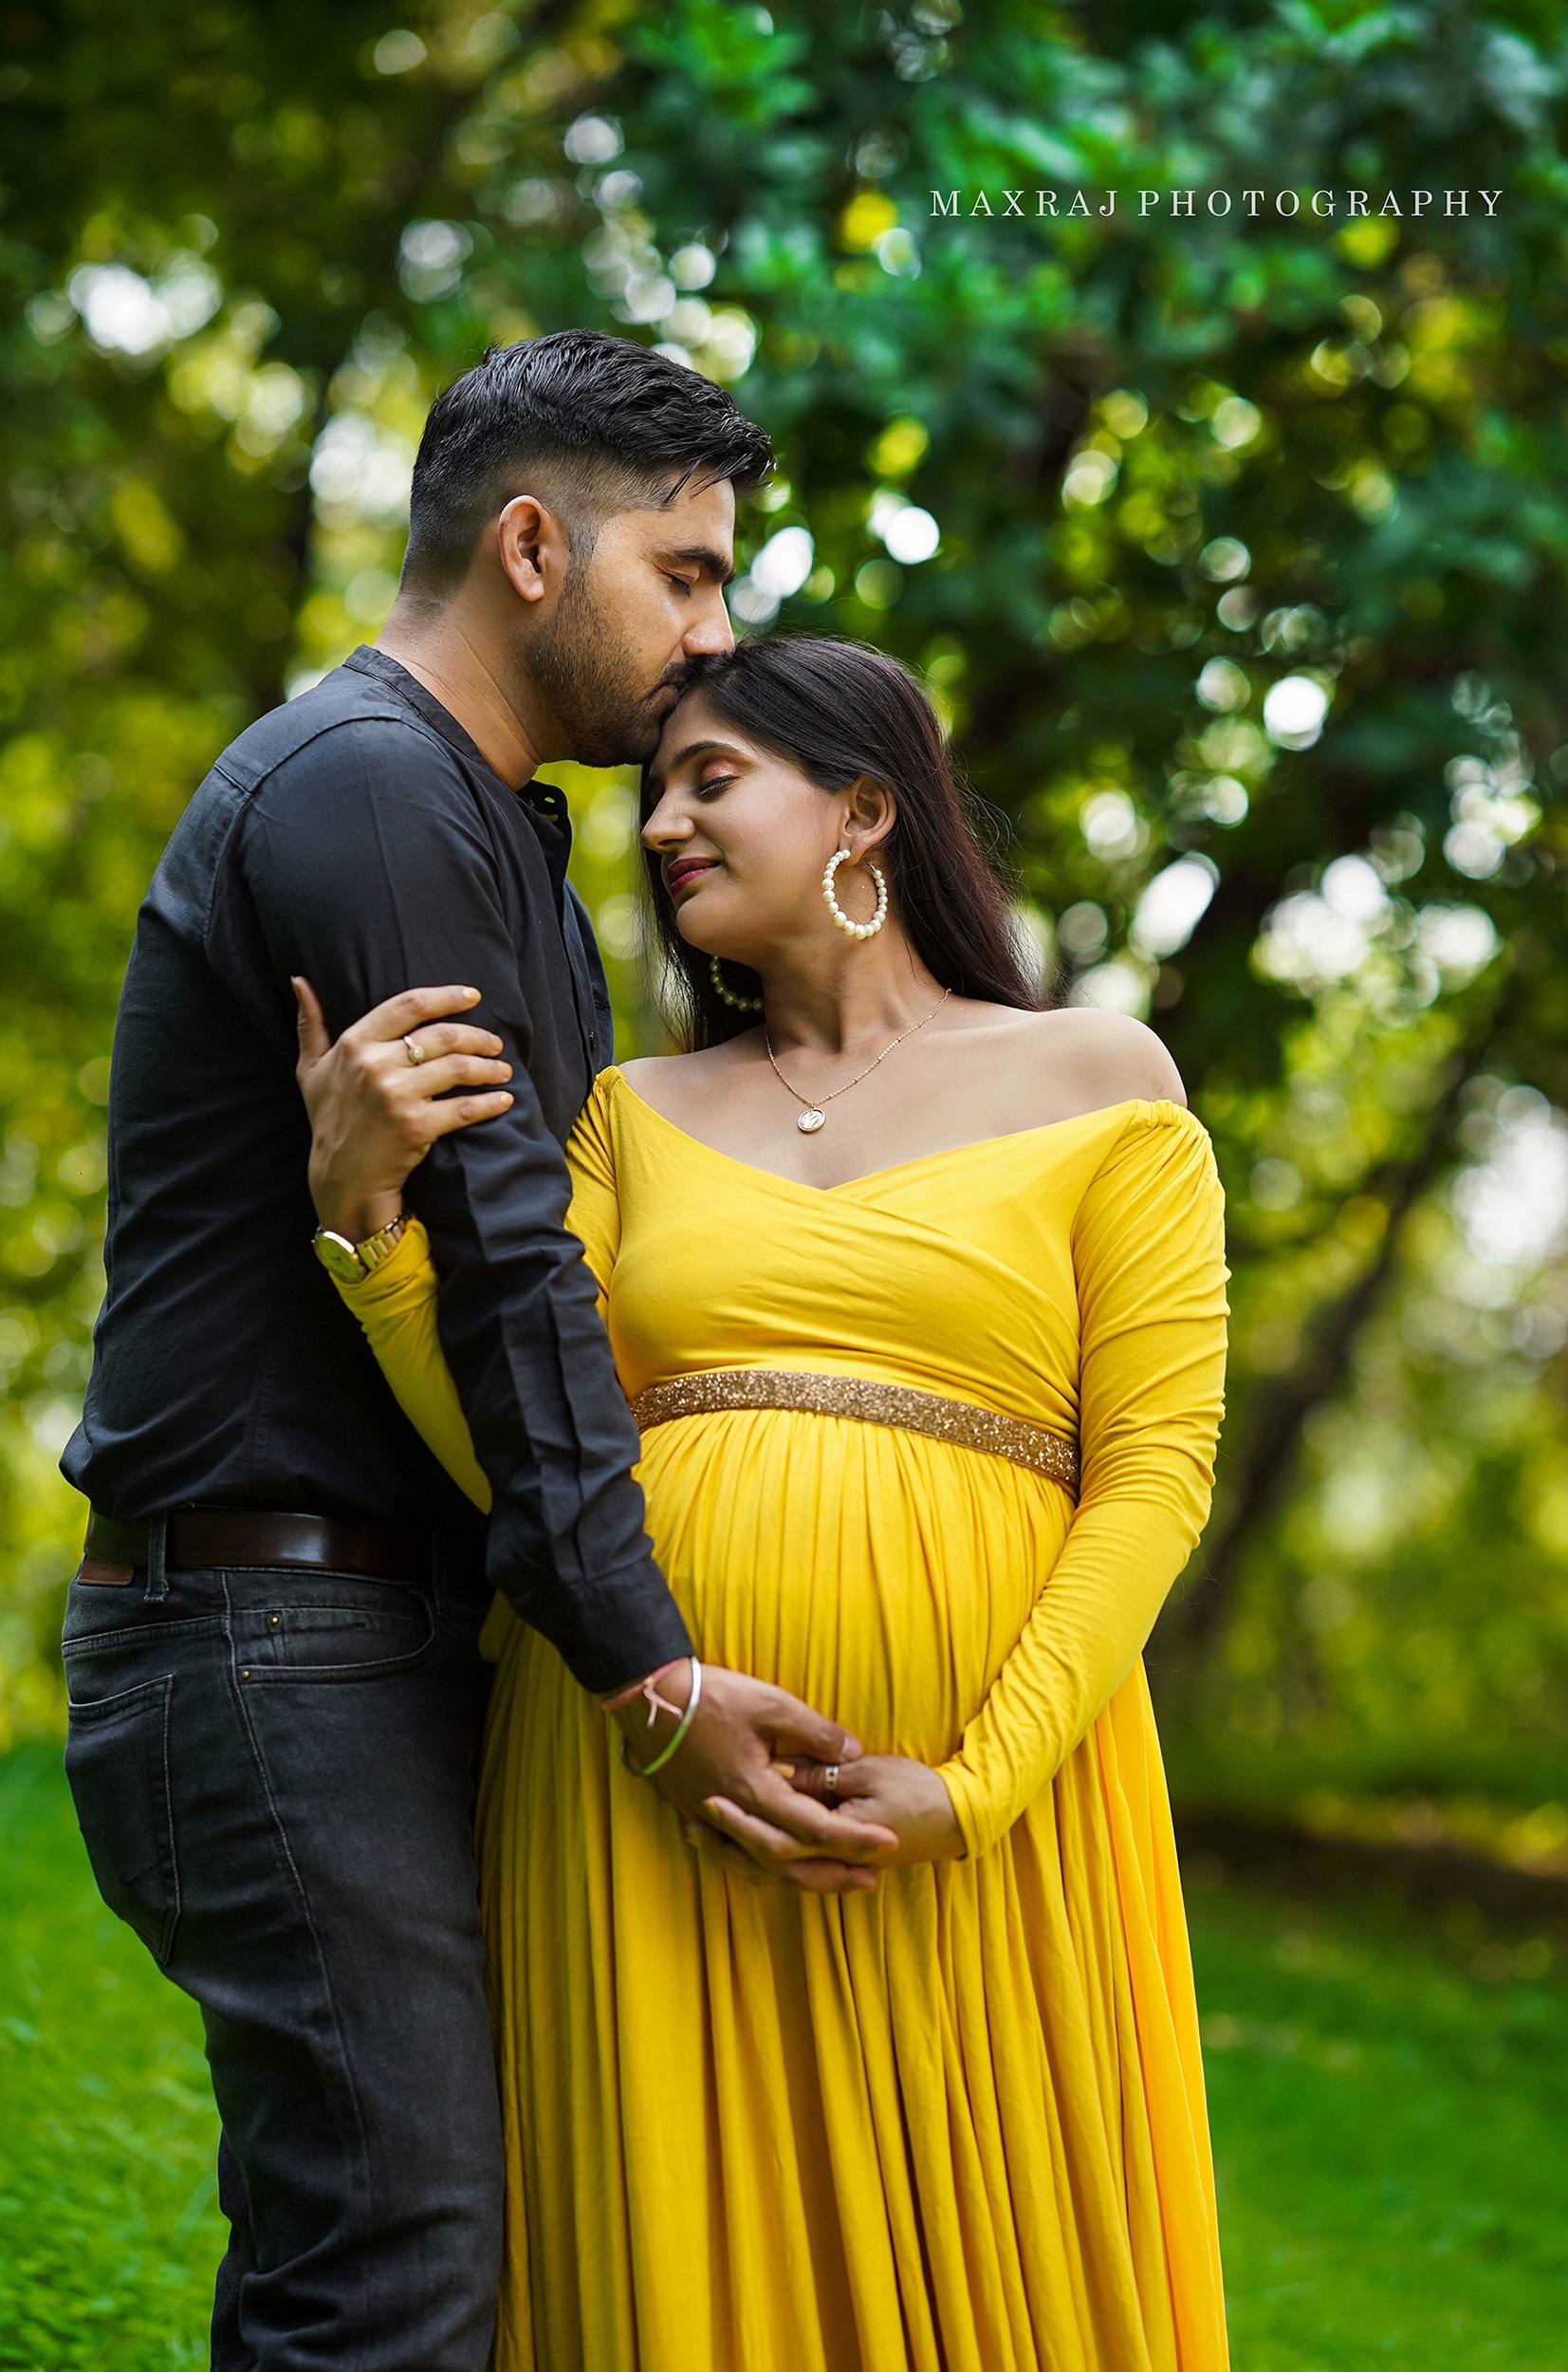 best maternity photographer in pune, couple maternity photoshoot poses, maternity photoshoot in pune